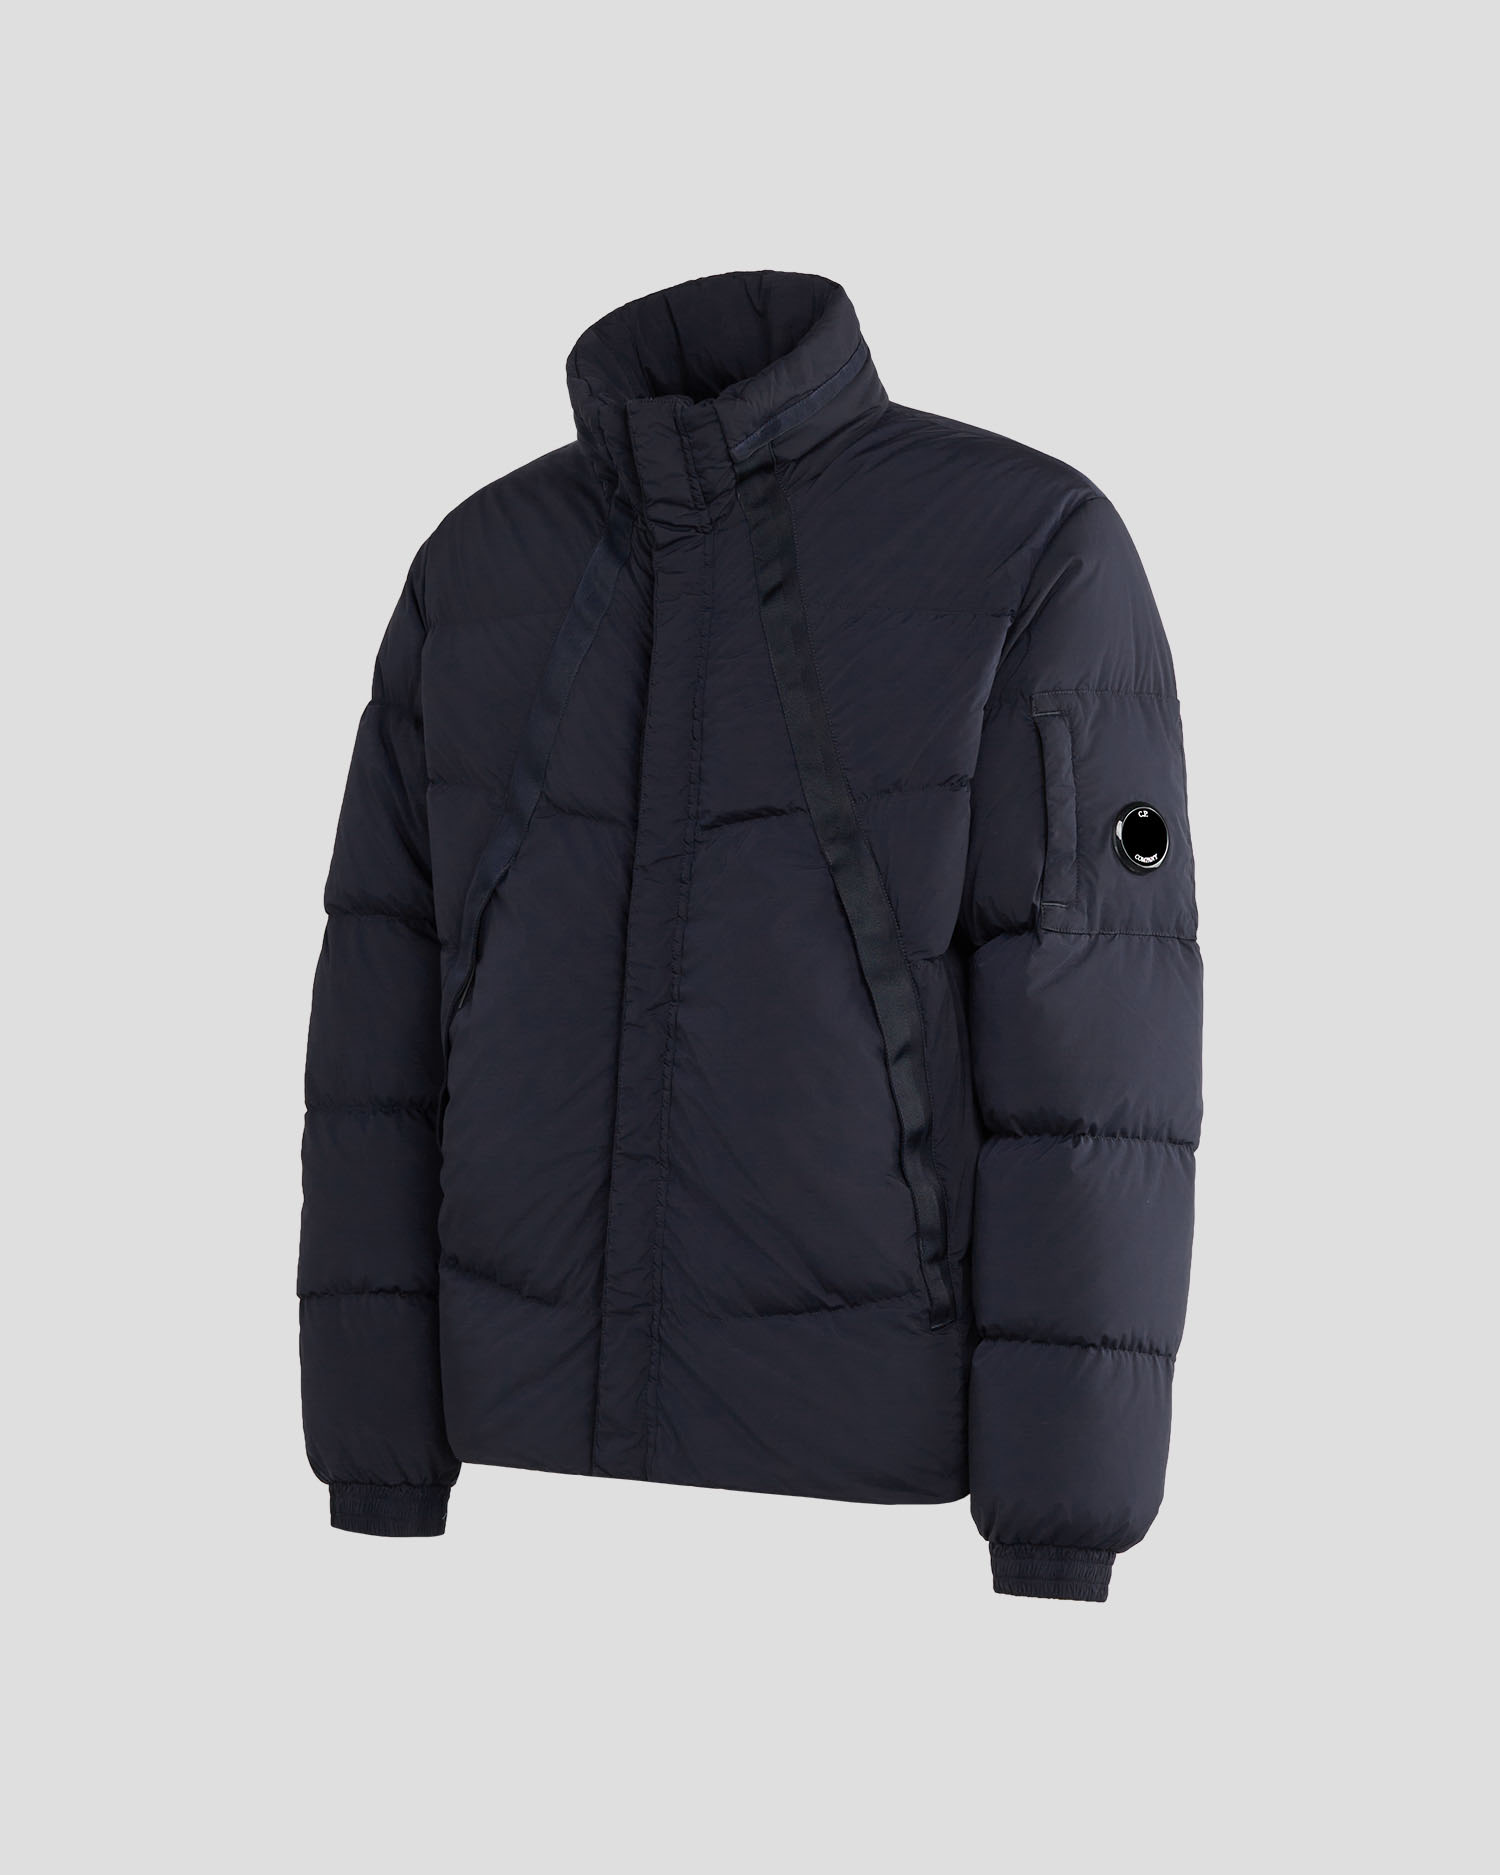 Nycra-R Down Jacket | C.P. Company Online Store